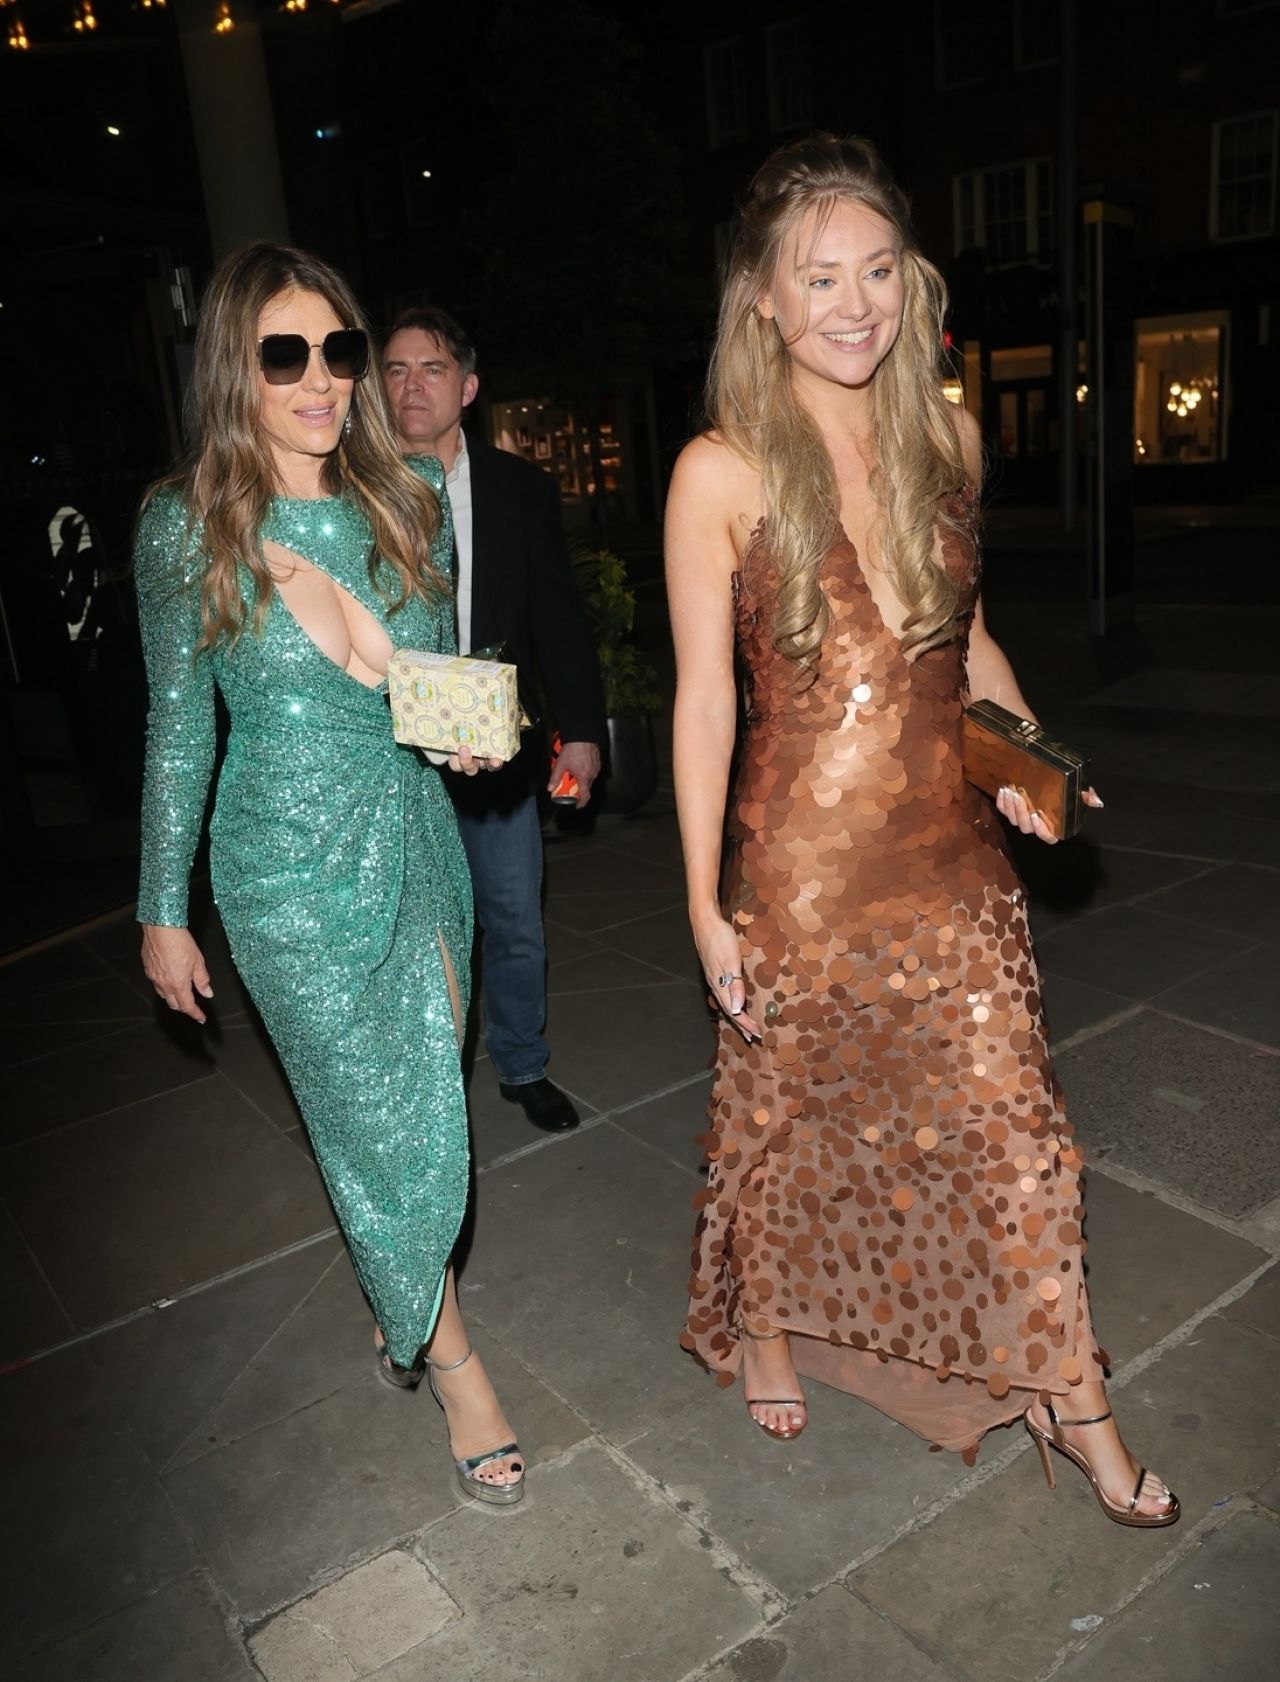 ELIZABETH HURLEY AND GEORGIA LOCK NIGHT OUT IN LONDON